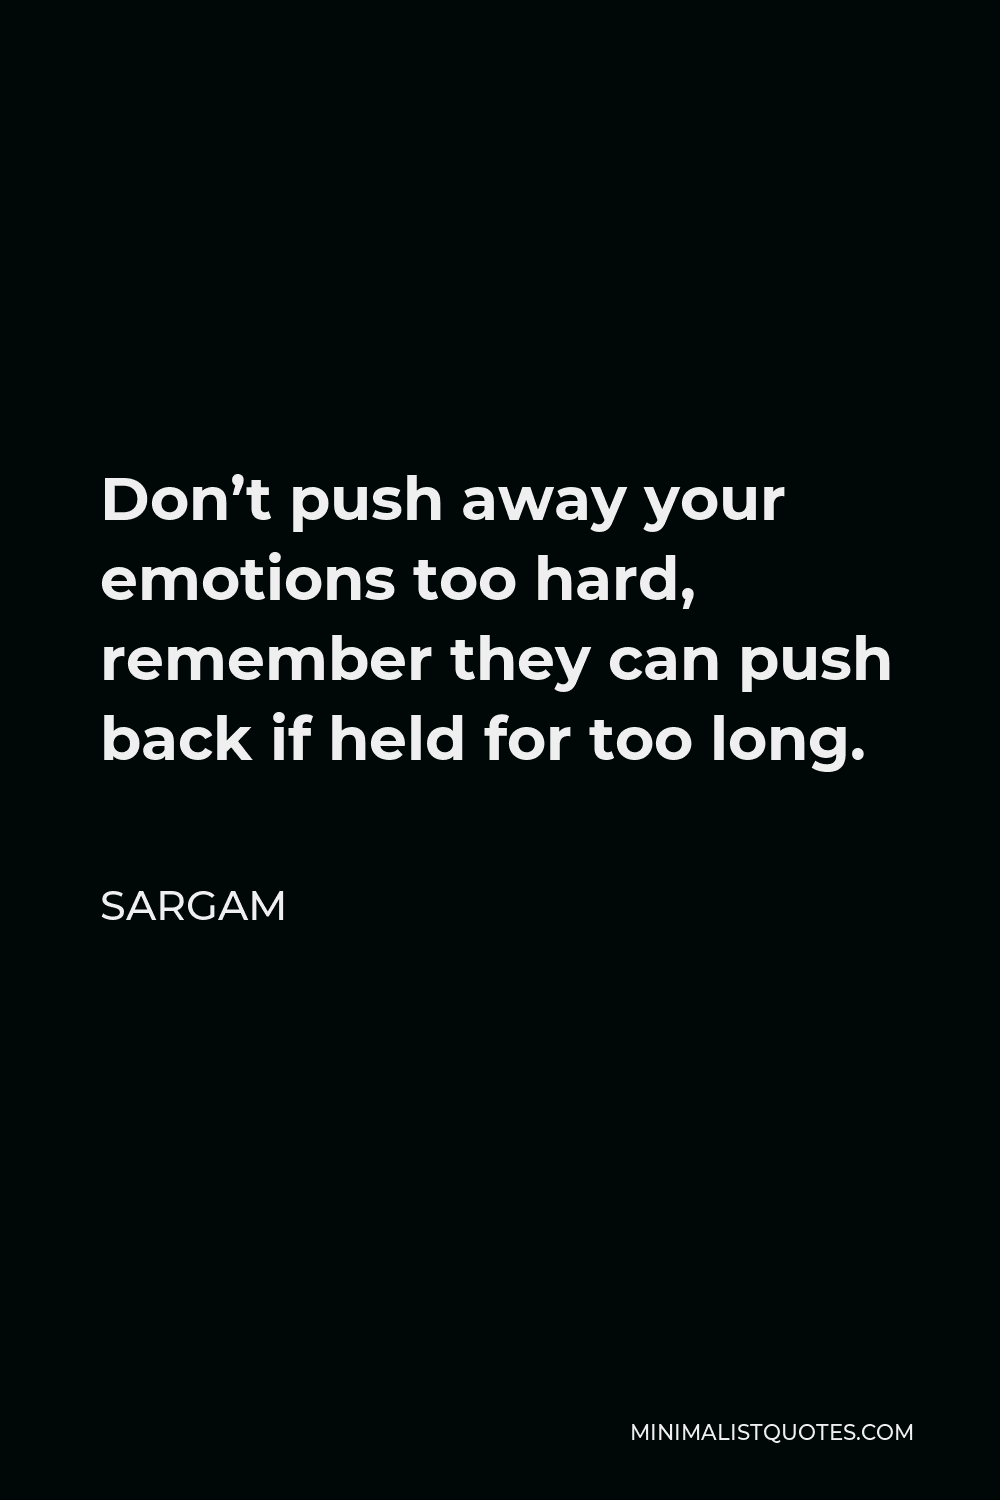 Sargam Quote - Don’t push away your emotions too hard, remember they can push back if held for too long.